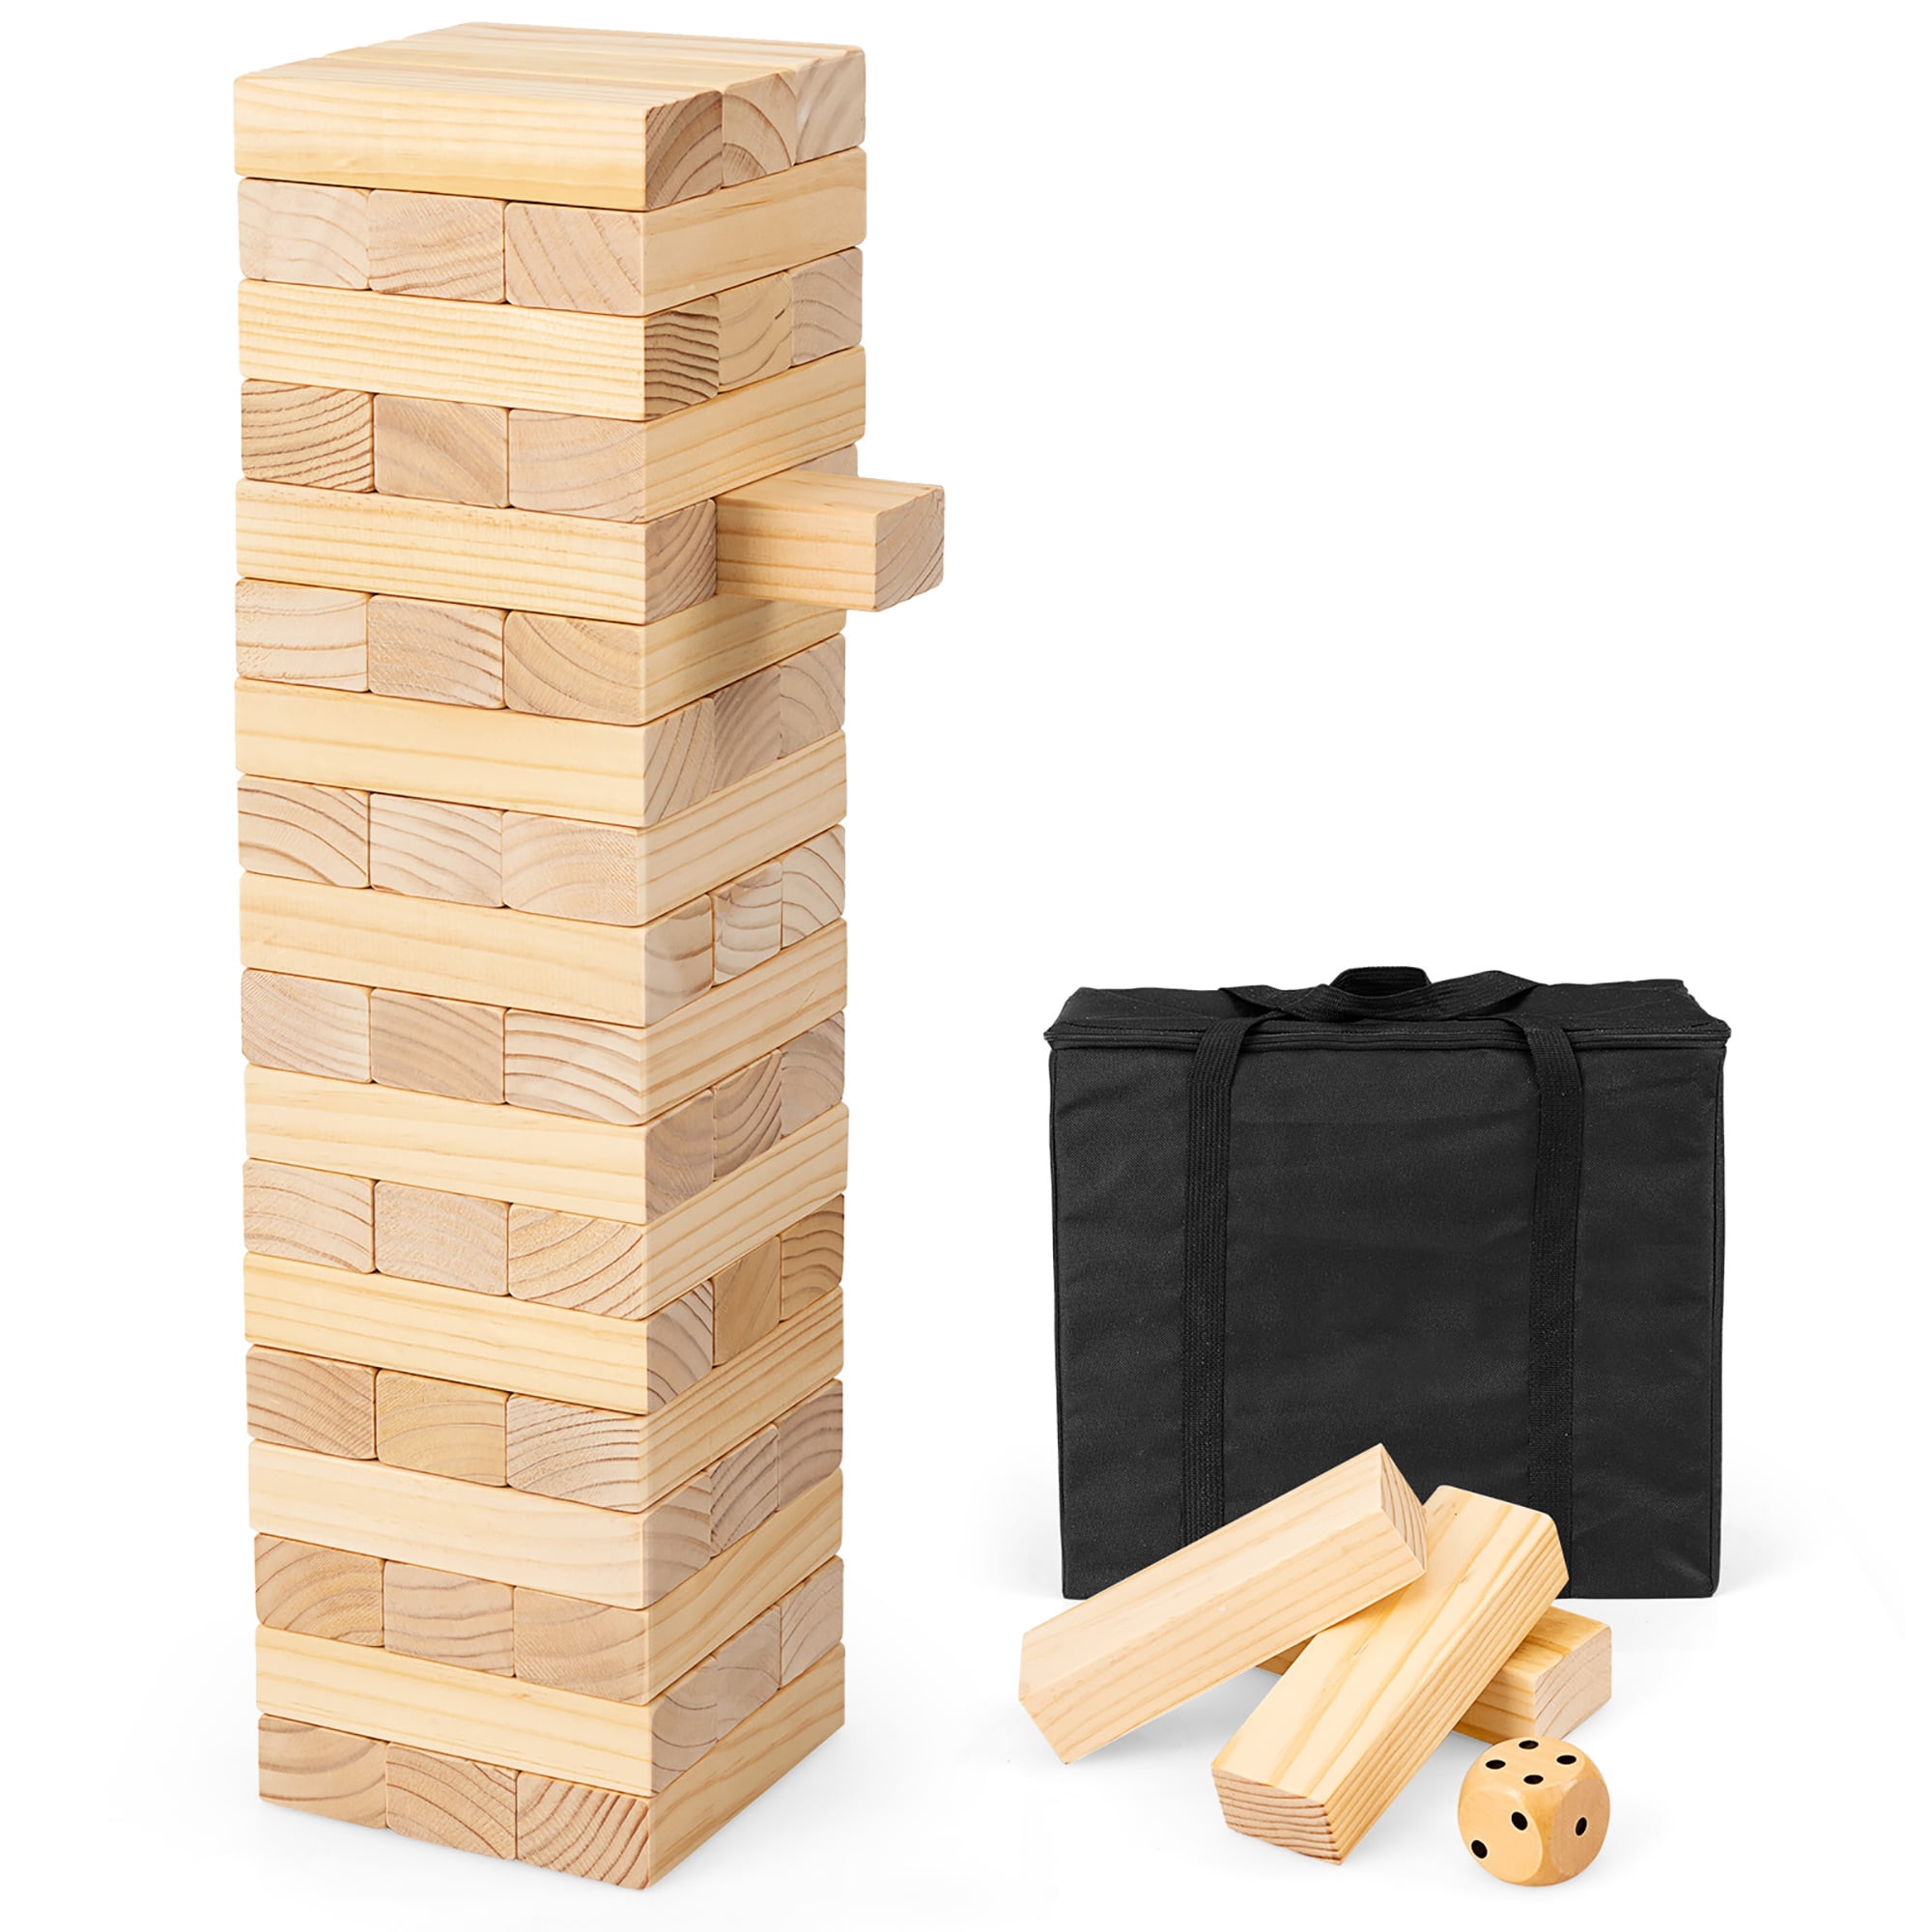 M.Y 54 PCS WOODEN TUMBLING TOWER STACKING INDOOR OUTDOOR FAMILY CHILDREN GAME 